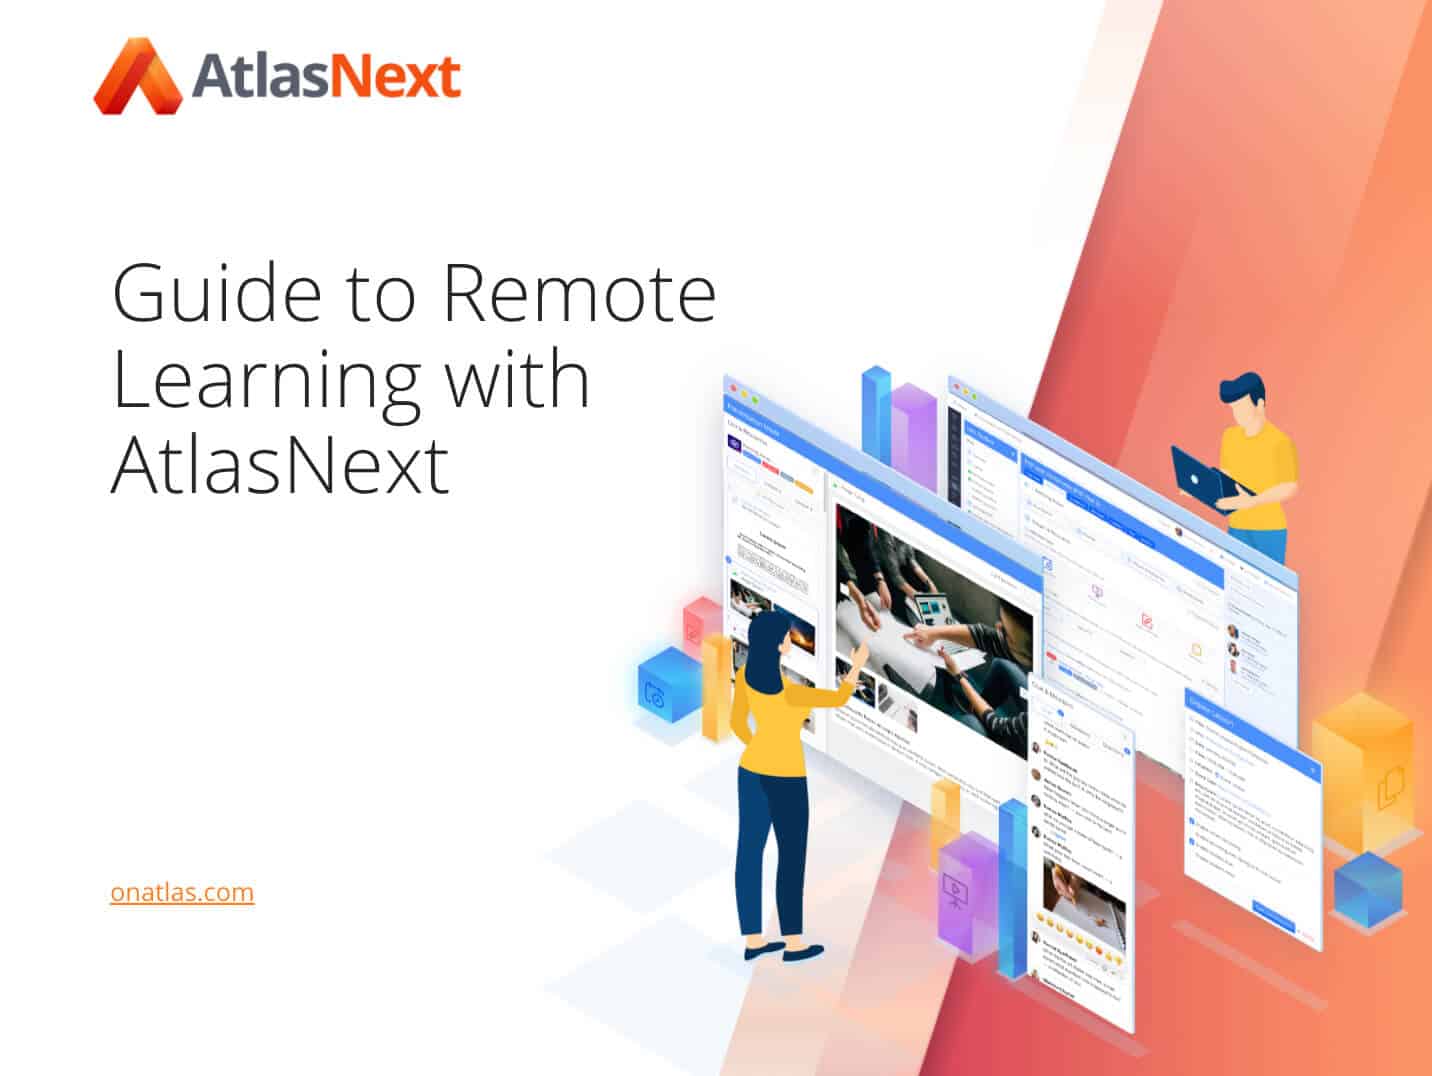 Guide to Remote Learning with AtlasNext